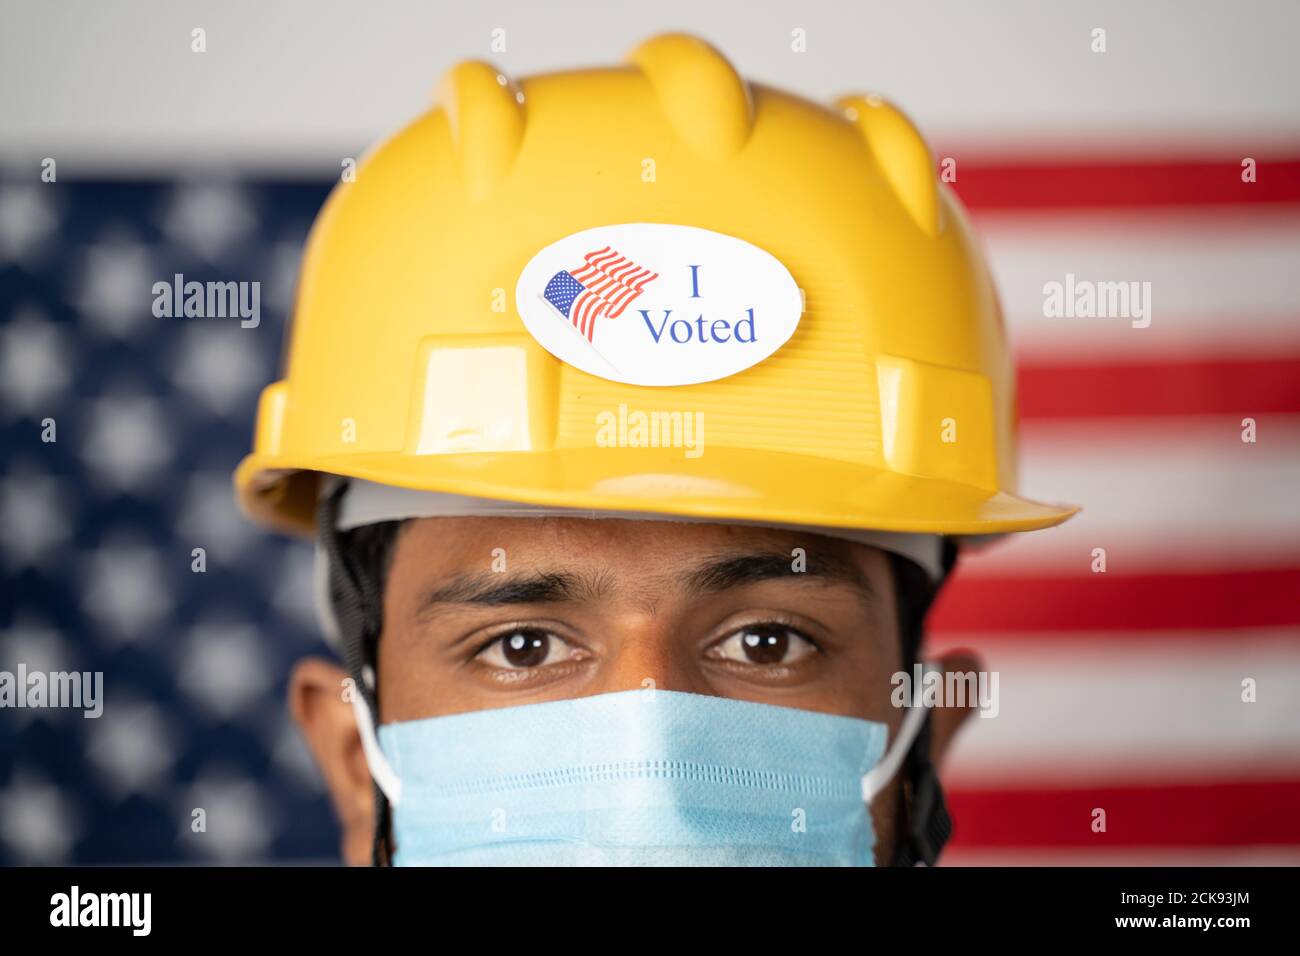 Close up of I voted sticker on worker hardhat with US flag as background - Concept of USA elections and voting. Stock Photo